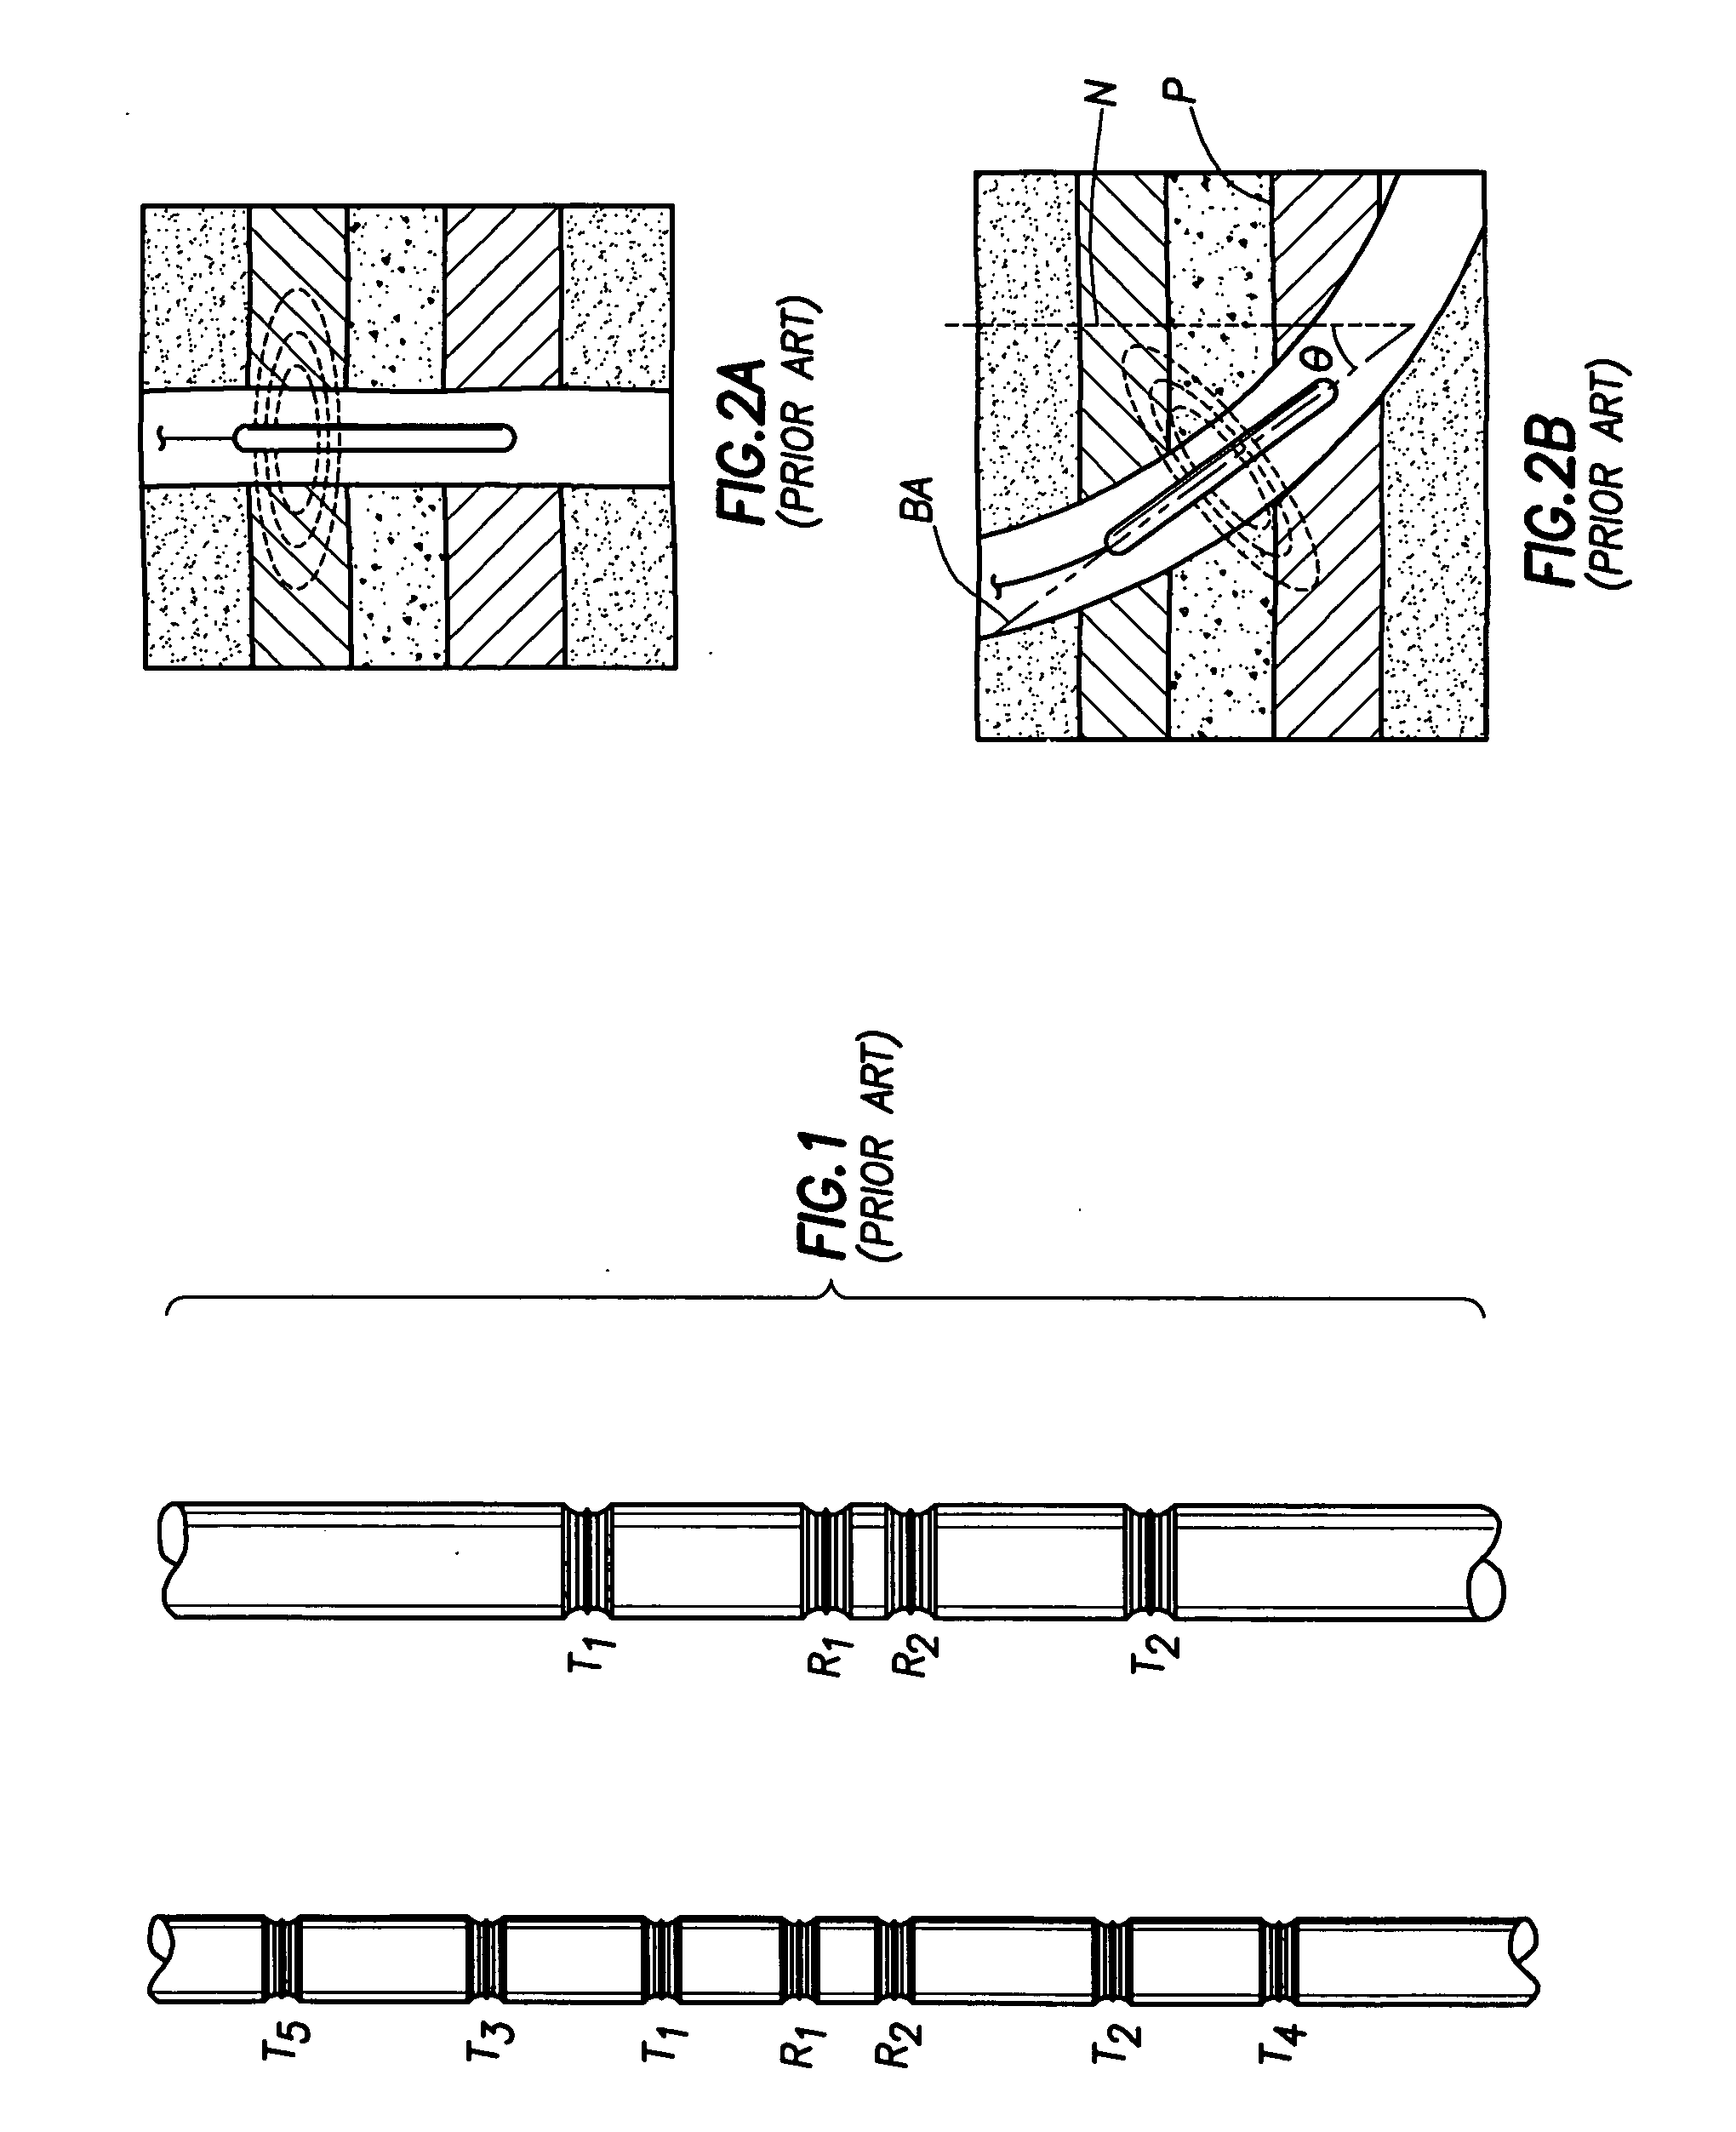 Directional electromagnetic wave resistivity apparatus and method